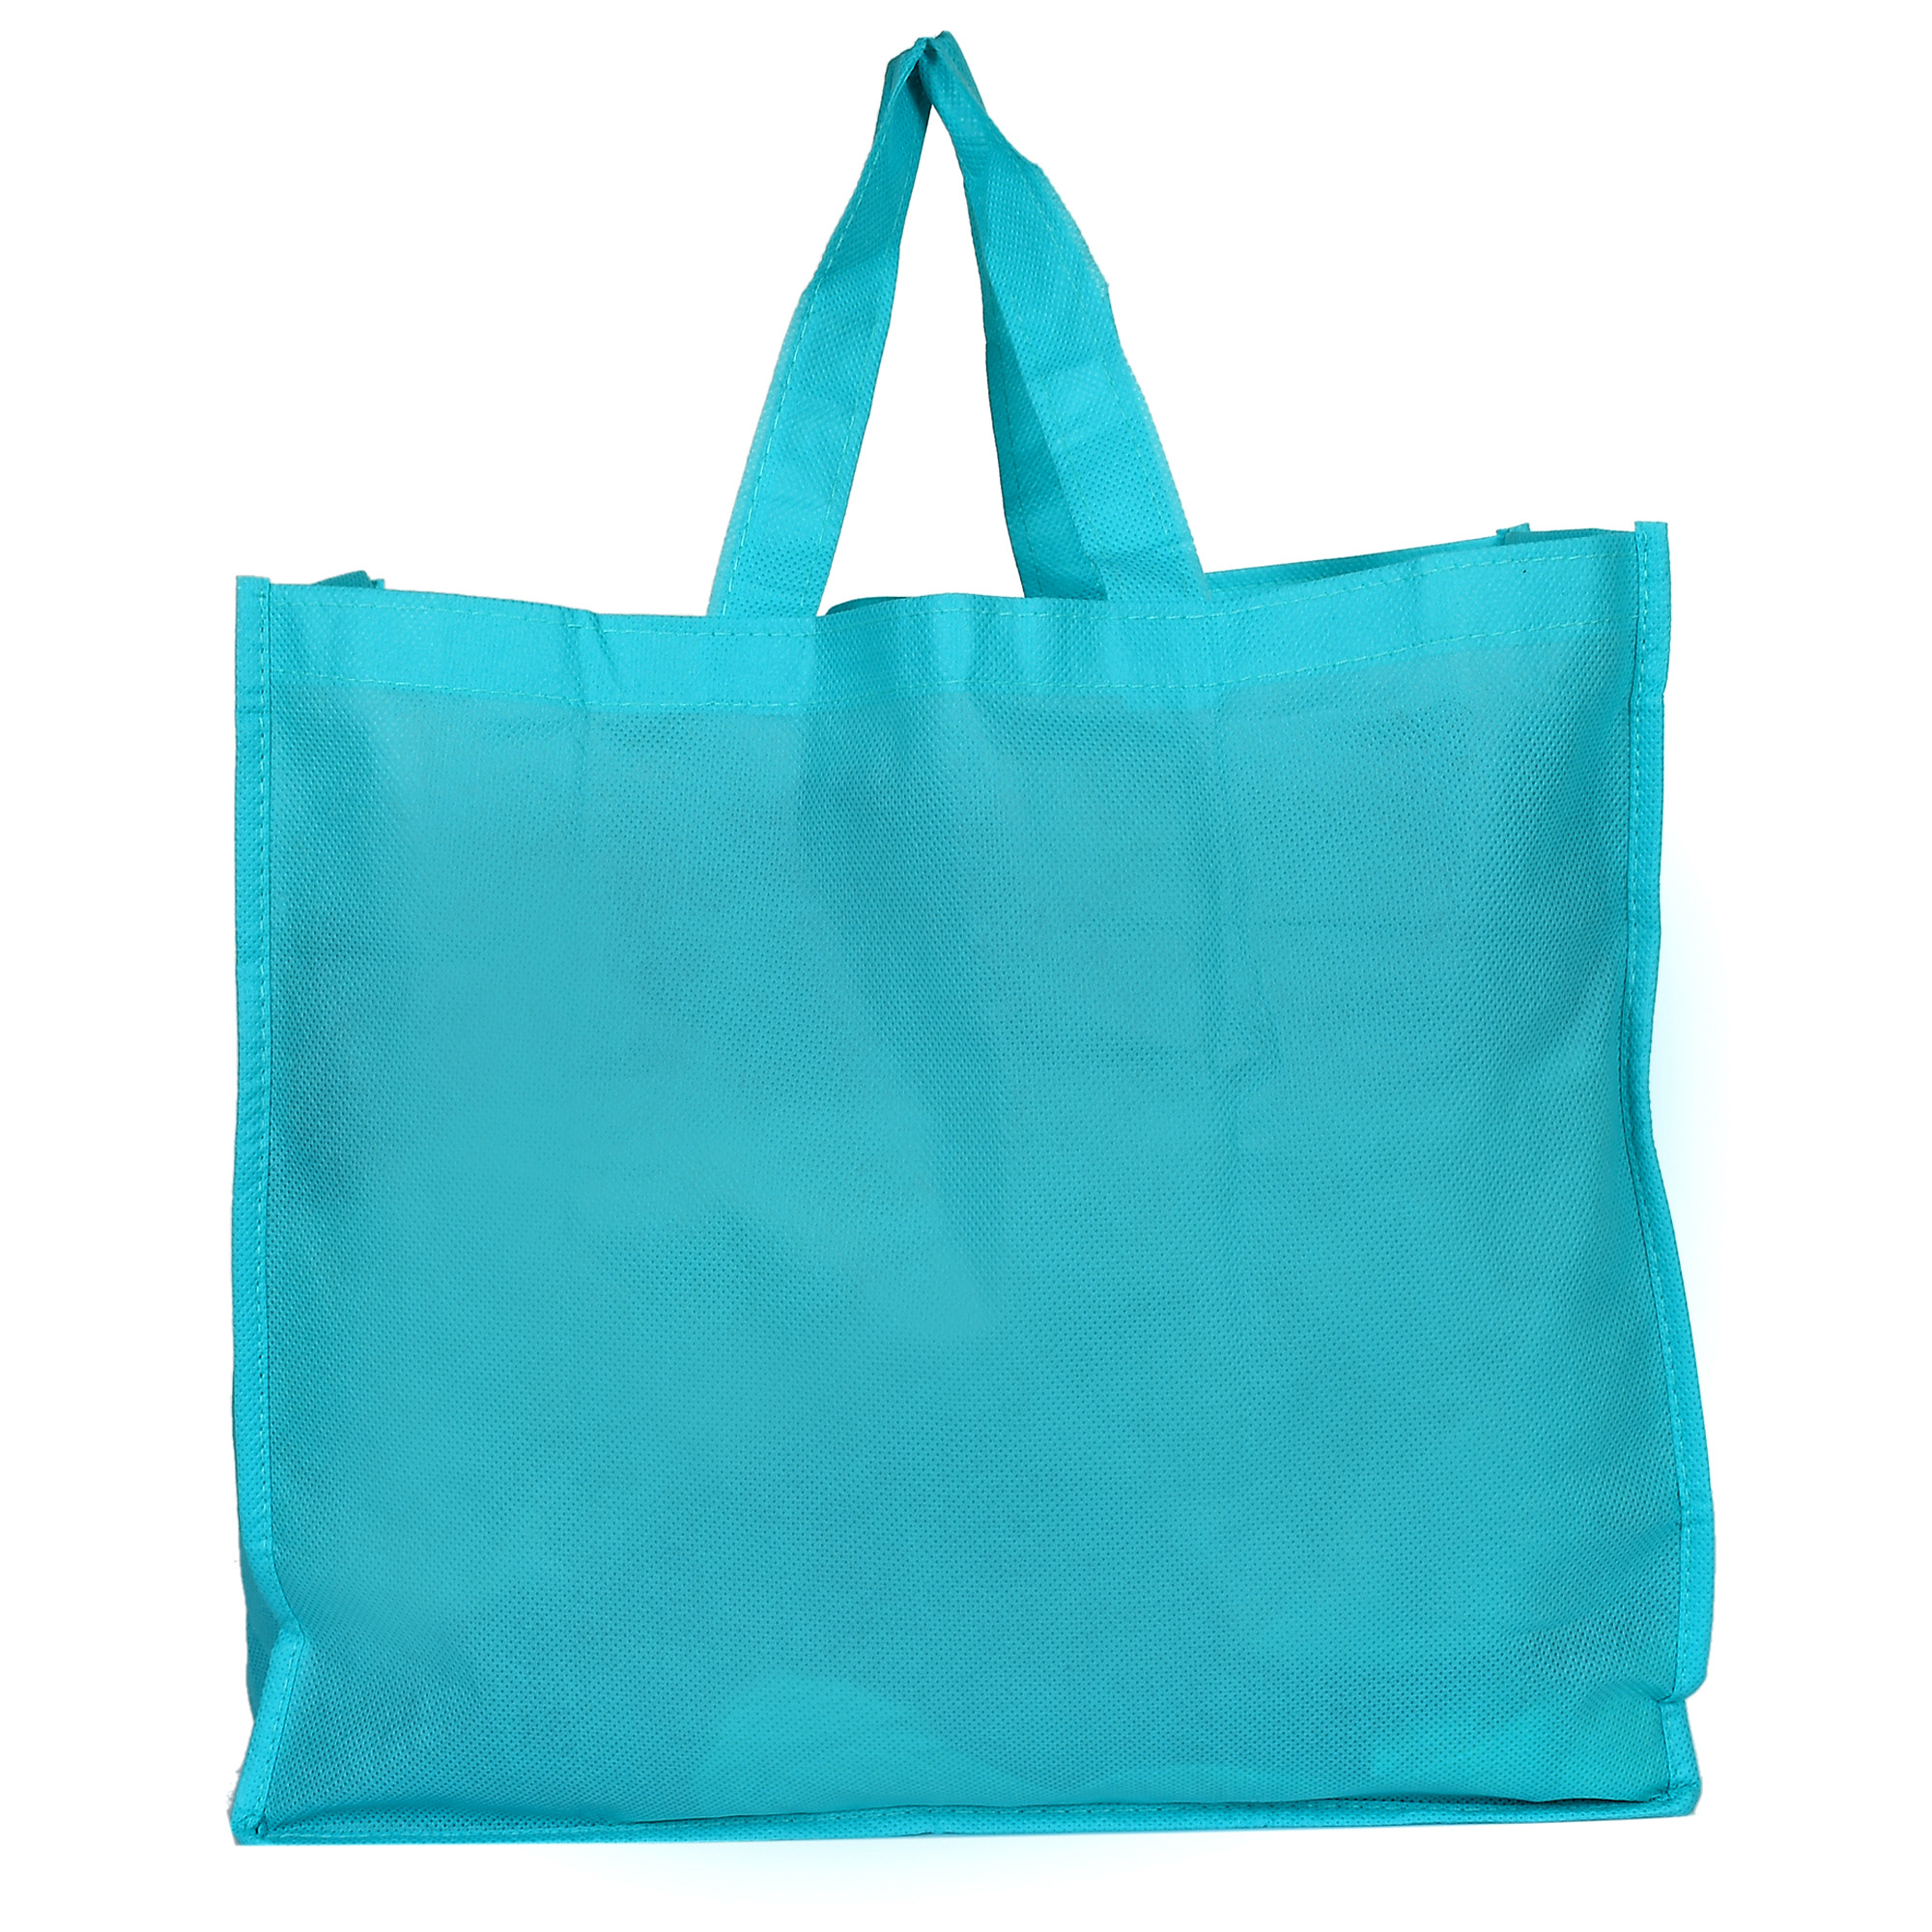 Kuber Industries Shopping Grocery Bags Foldable, Washable Grocery Tote Bag with One Small Pocket, Eco-Friendly Purse Bag Fits in Pocket Waterproof & Lightweight (Green & Blue)